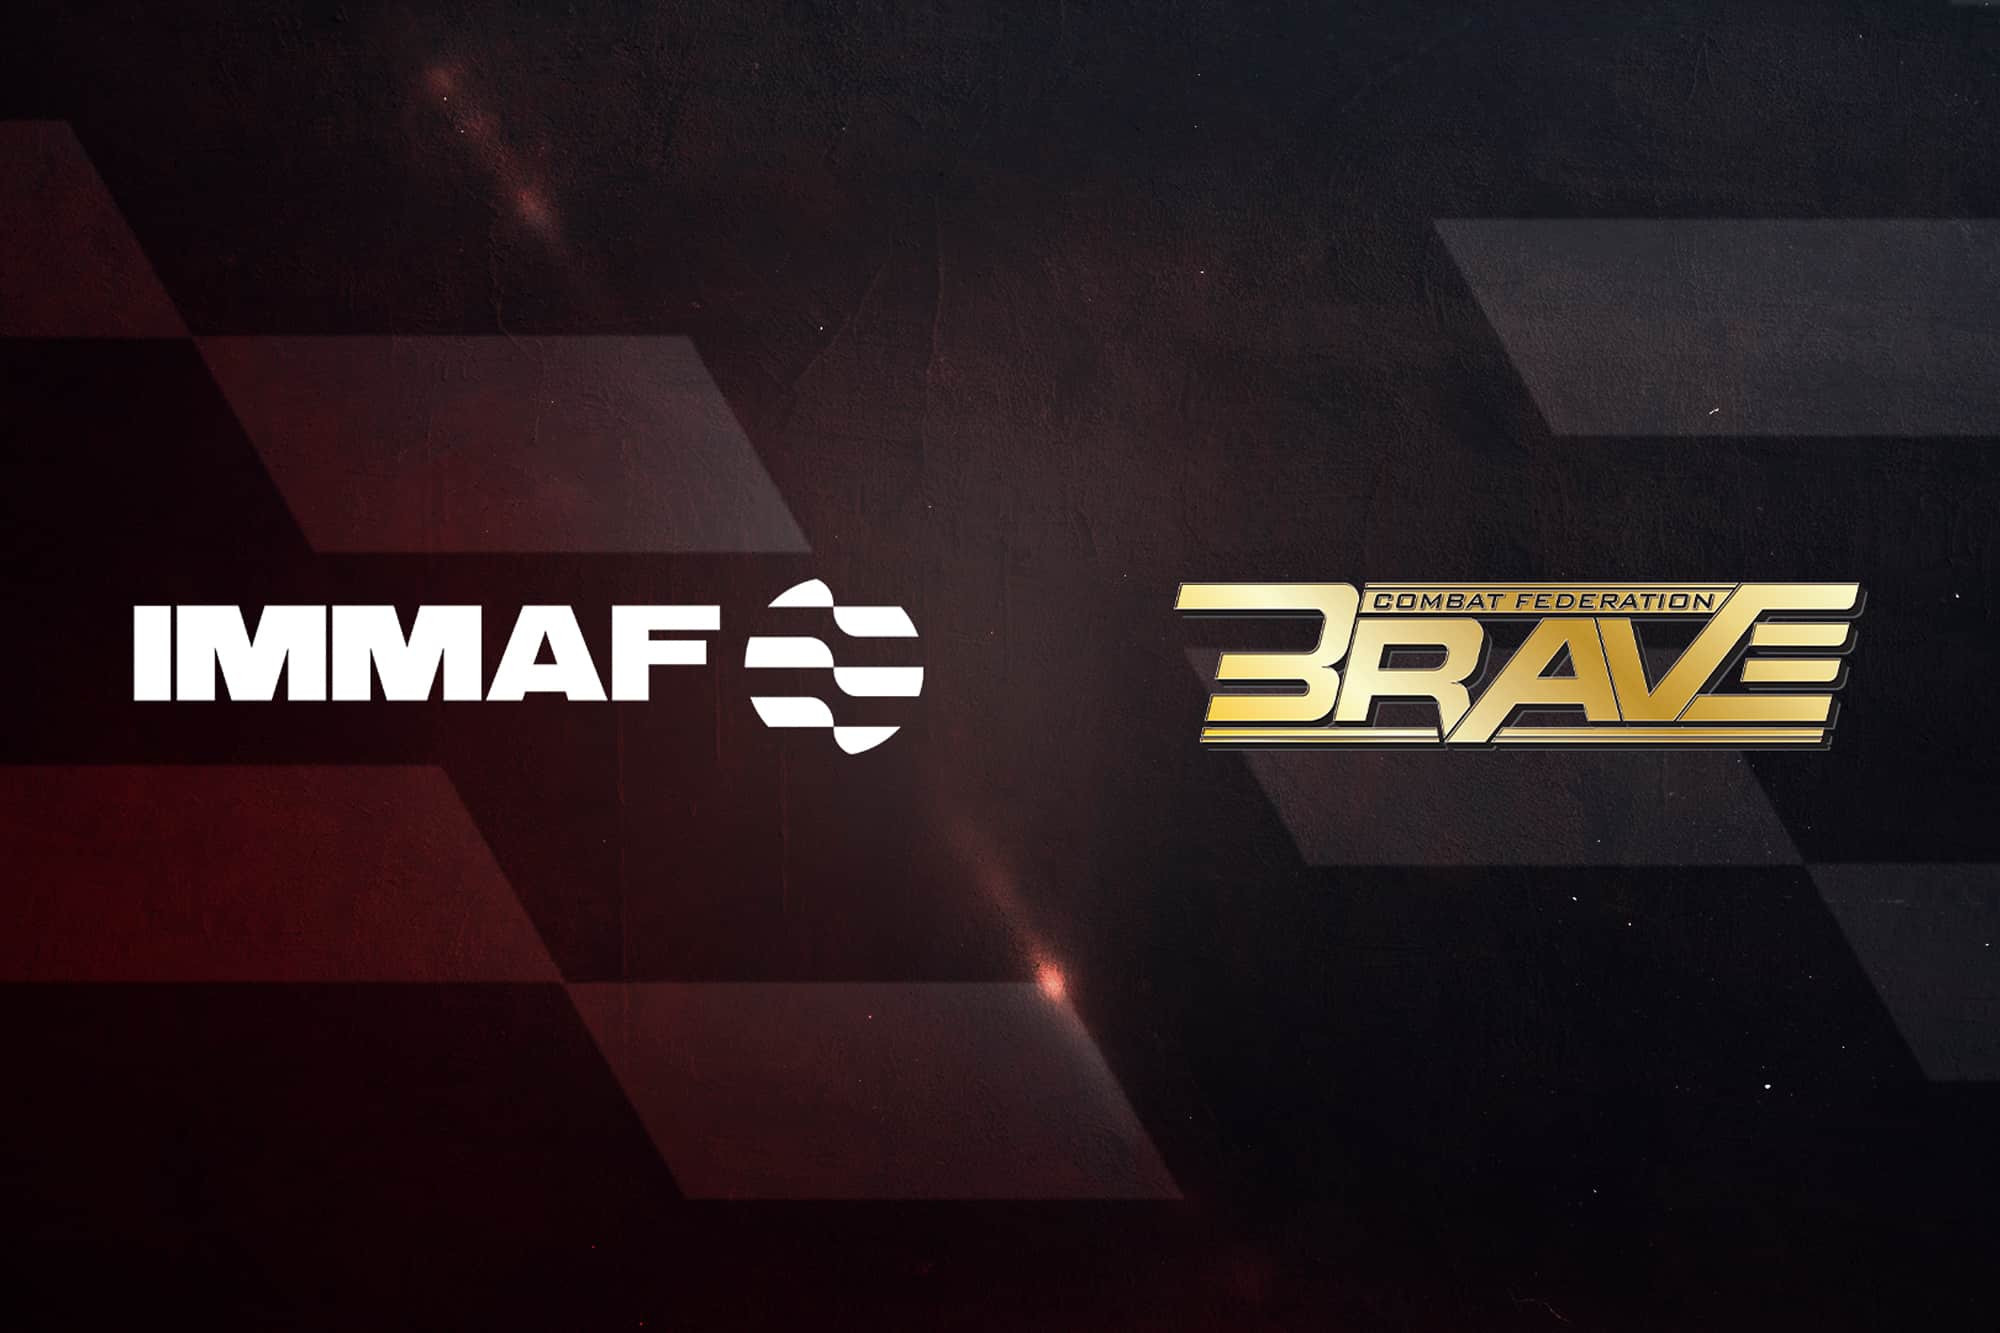 The International Mixed Martial Arts Federation has signed a multi-year sponsorship agreement with BRAVE Combat Federation ©IMMAF